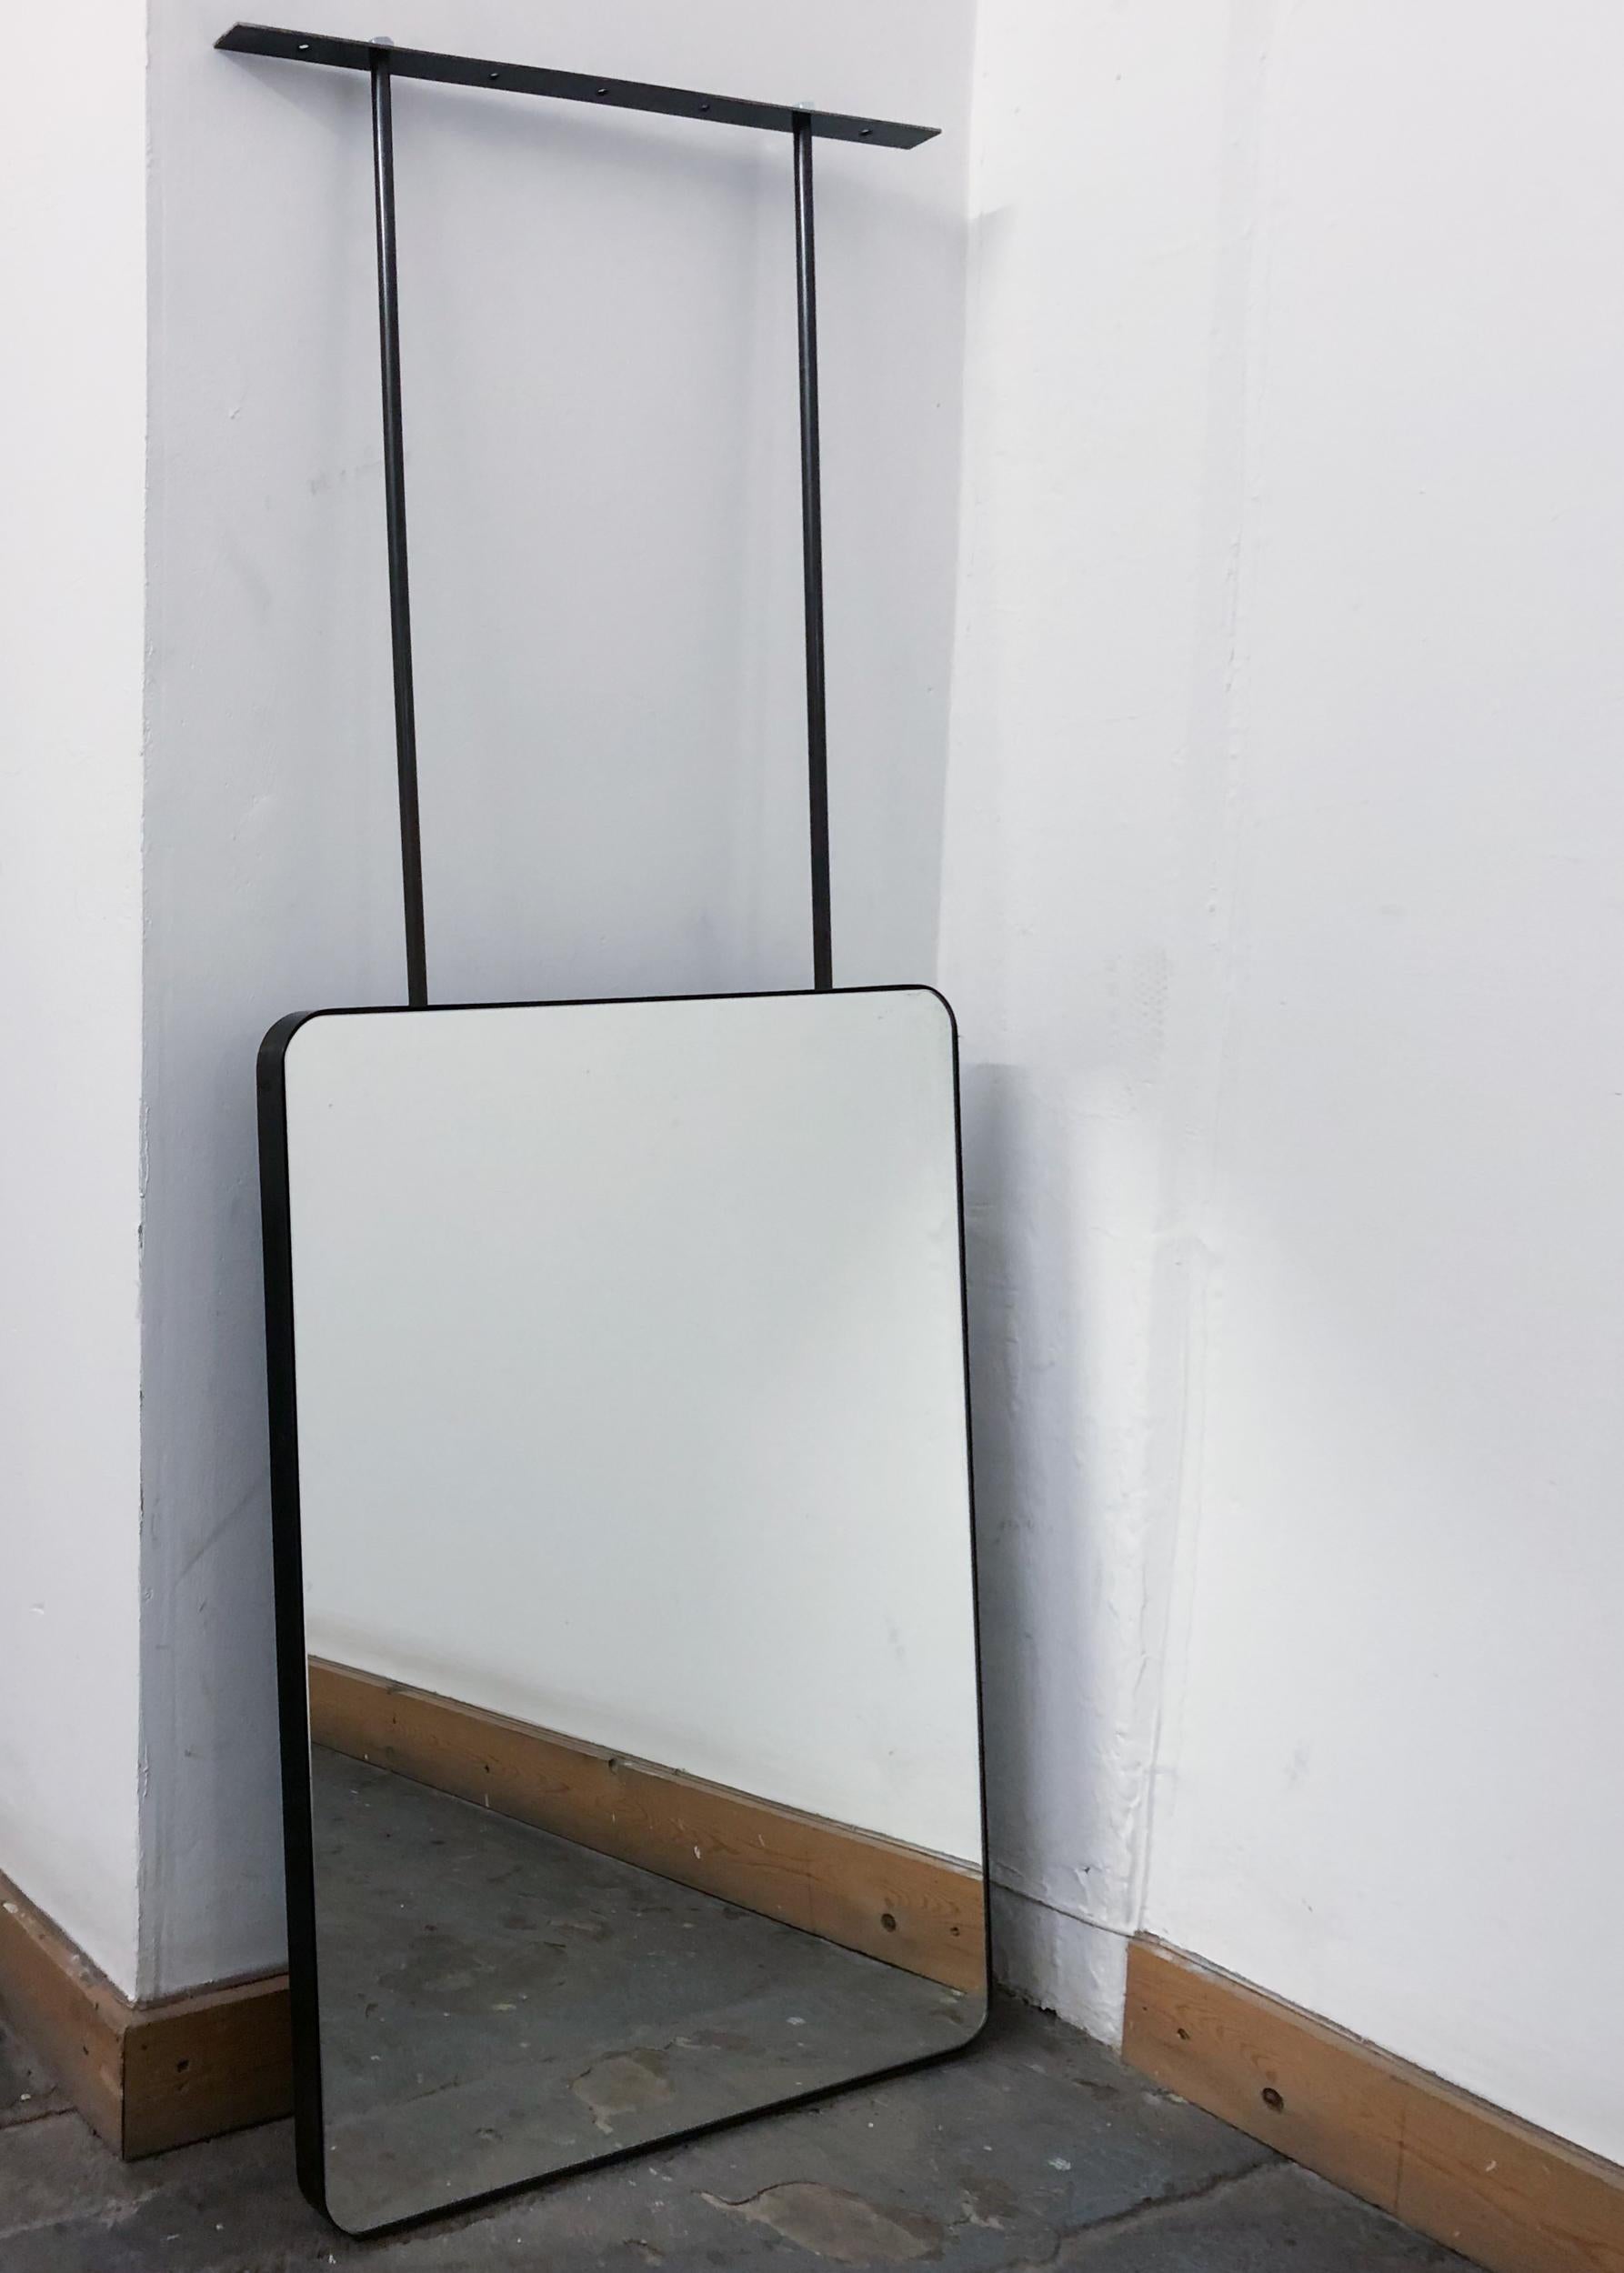 
The images in this personal entry illustrate a standard size of the suspended Quadris™ mirror with a blackened stainless steel frame. All specifications for this particular entry are as detailed in the presentation already provided and